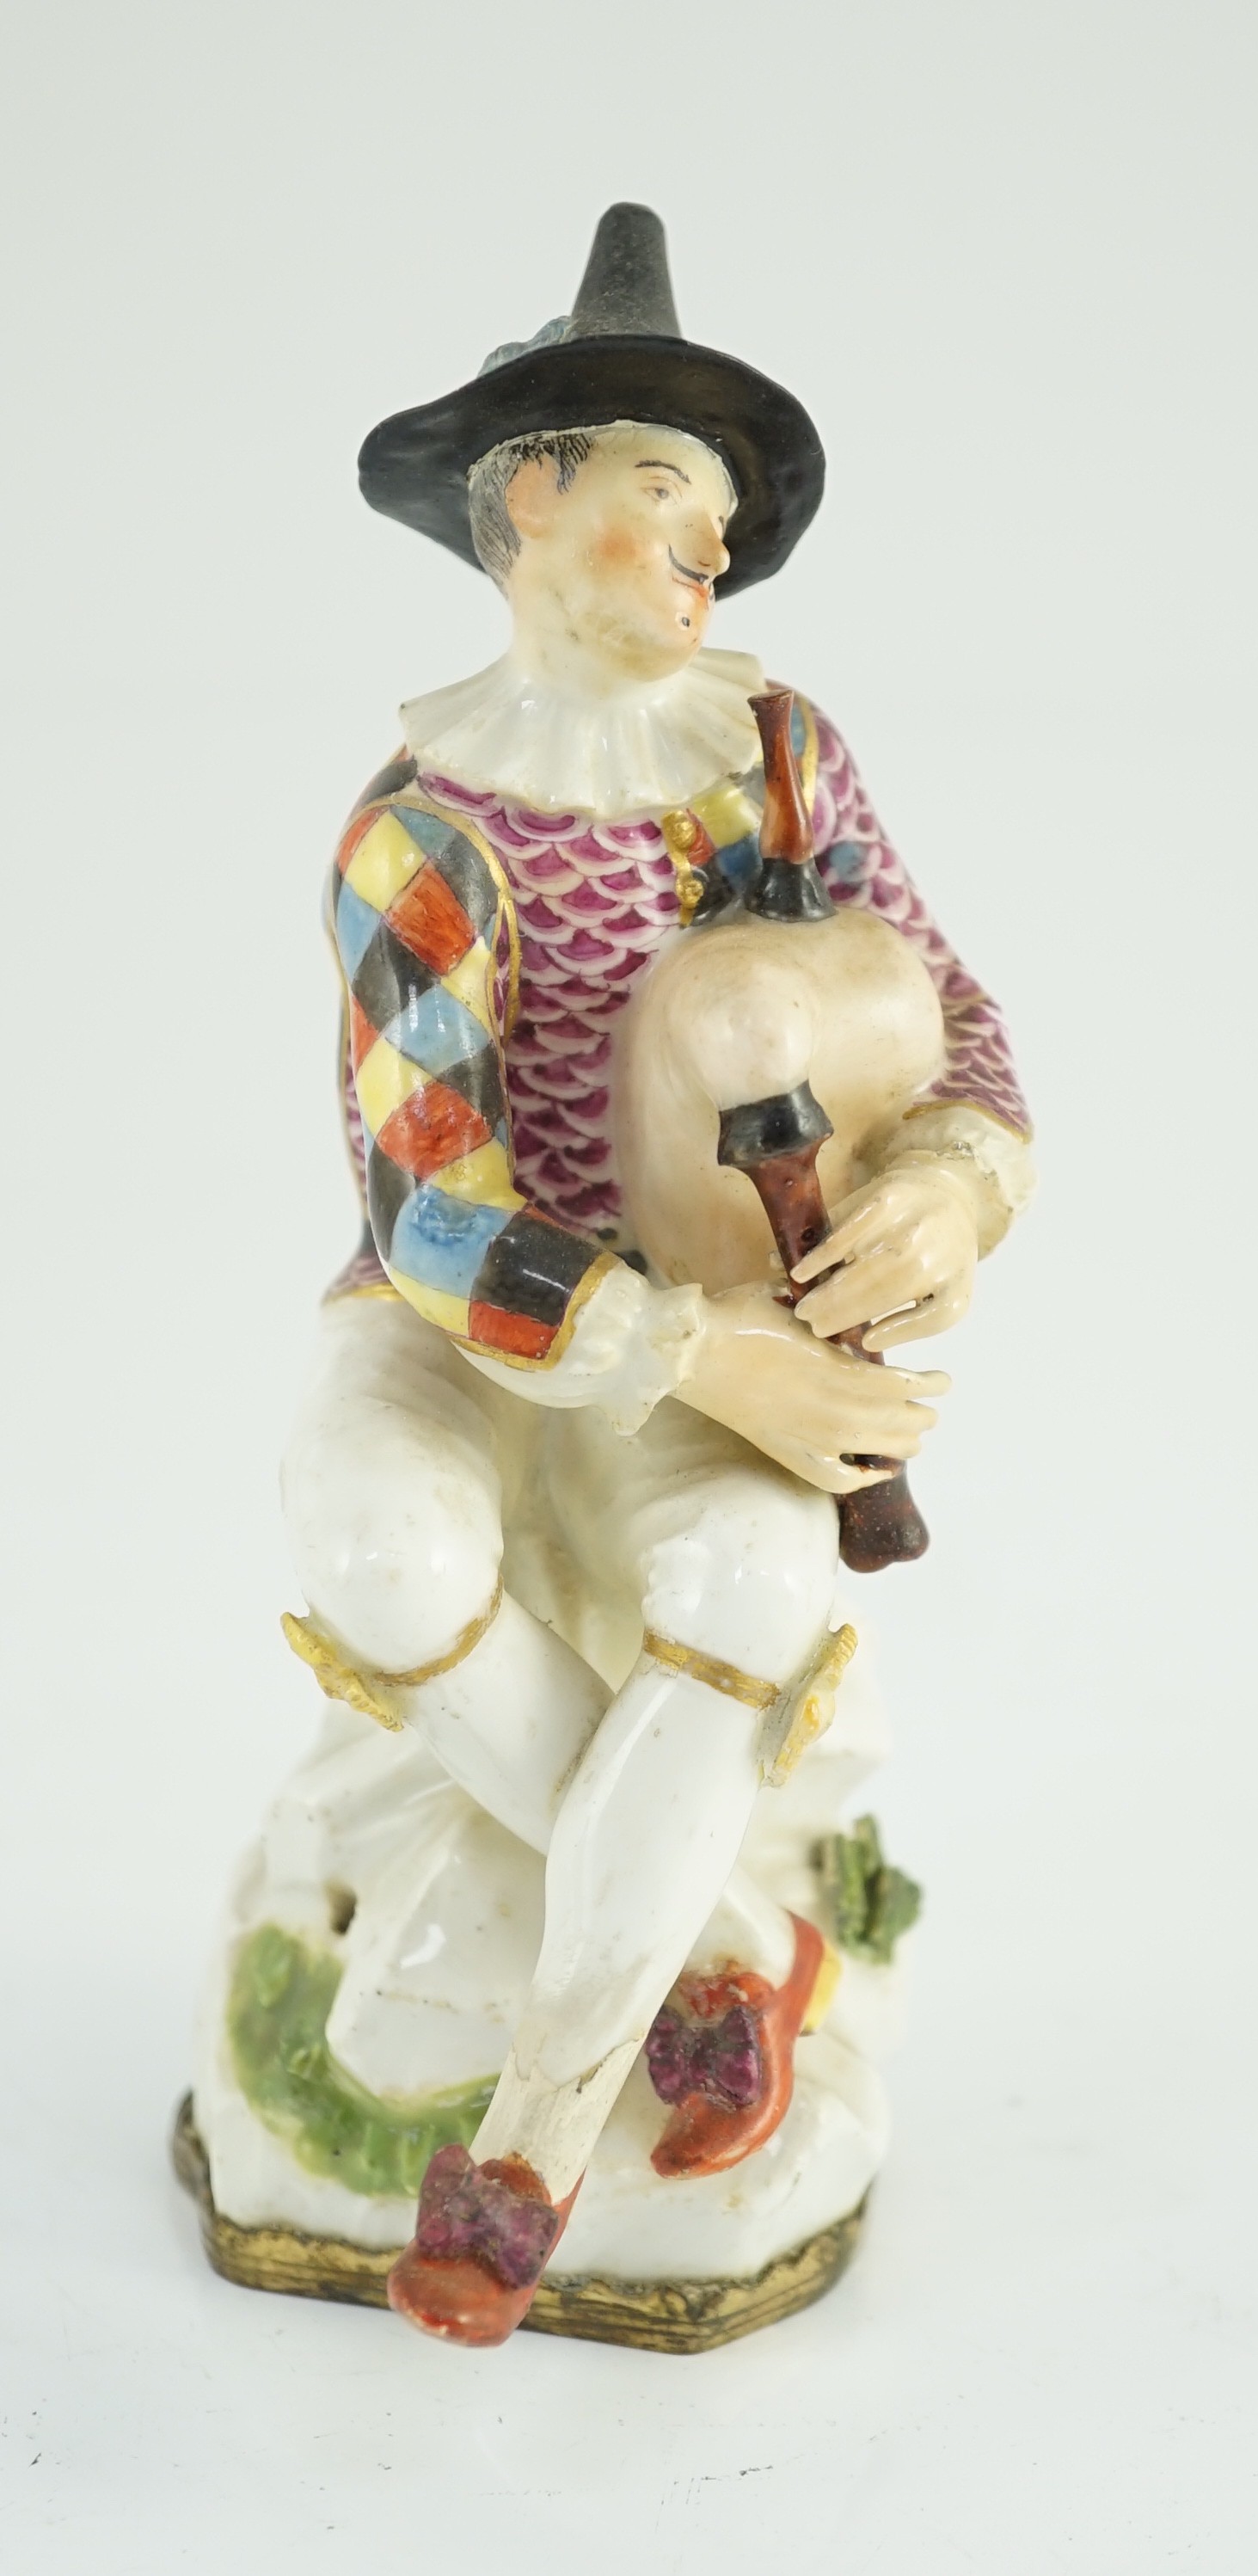 A Meissen porcelain figure of a seated bagpiper, mid 18th century, modelled by J.J. Kandler, wearing - Image 2 of 5